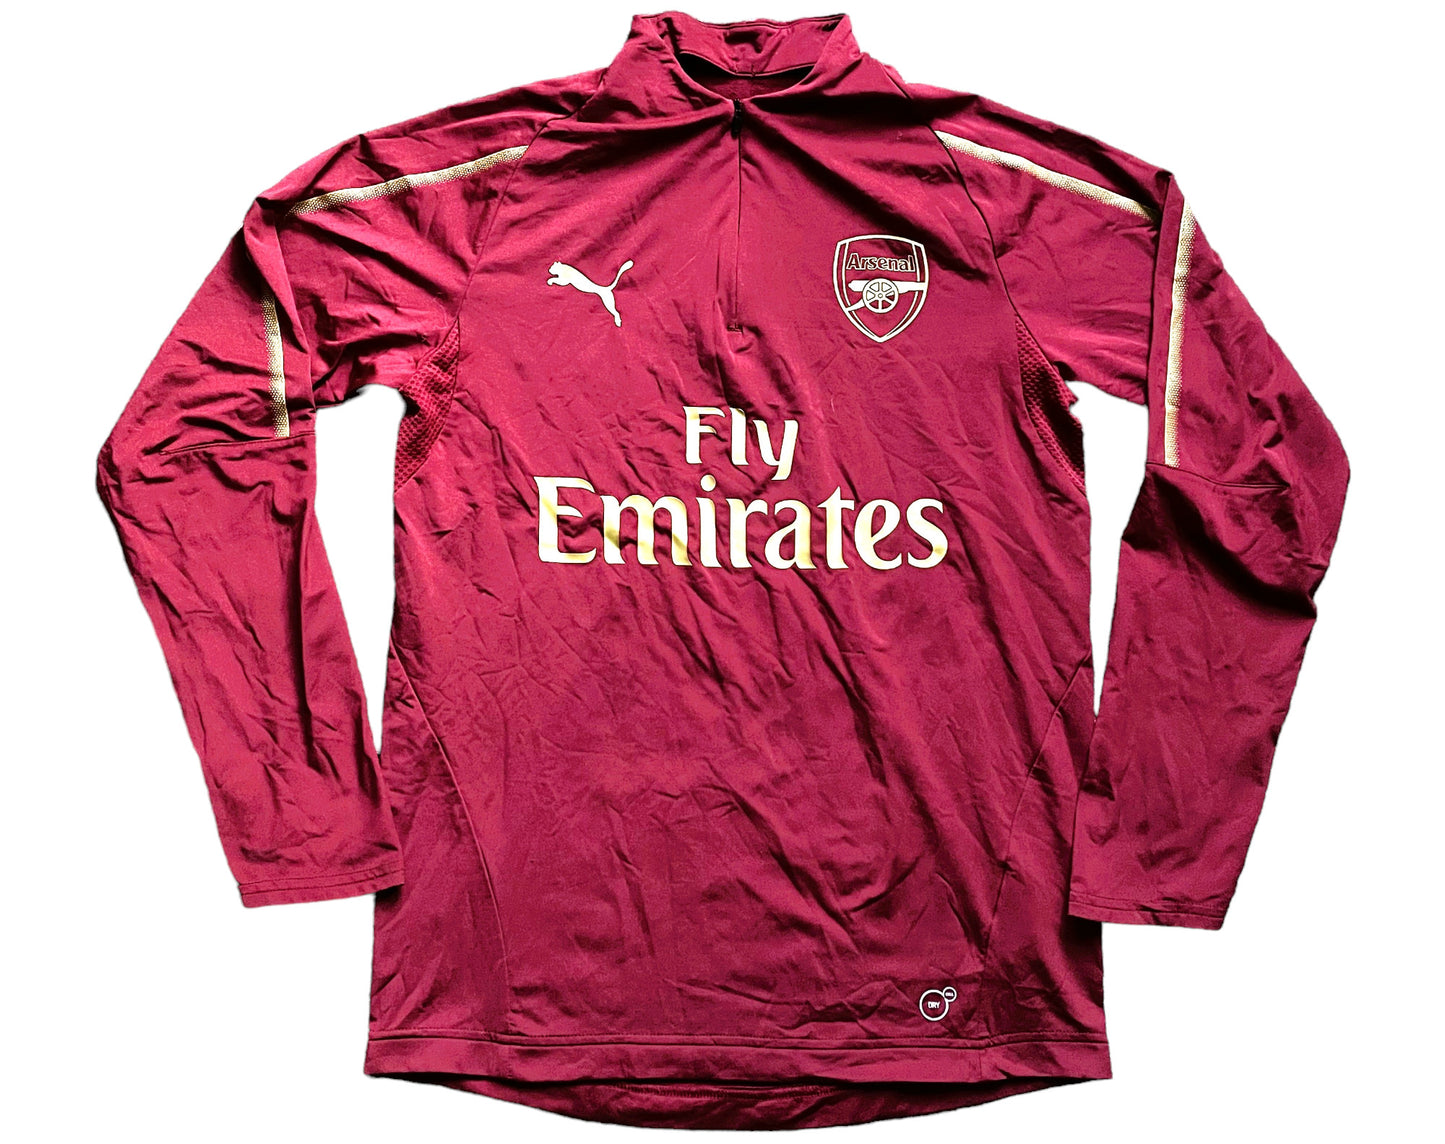 Arsenal Training Top (excellent) AdultsXS/Youths 164 13/14 years 14